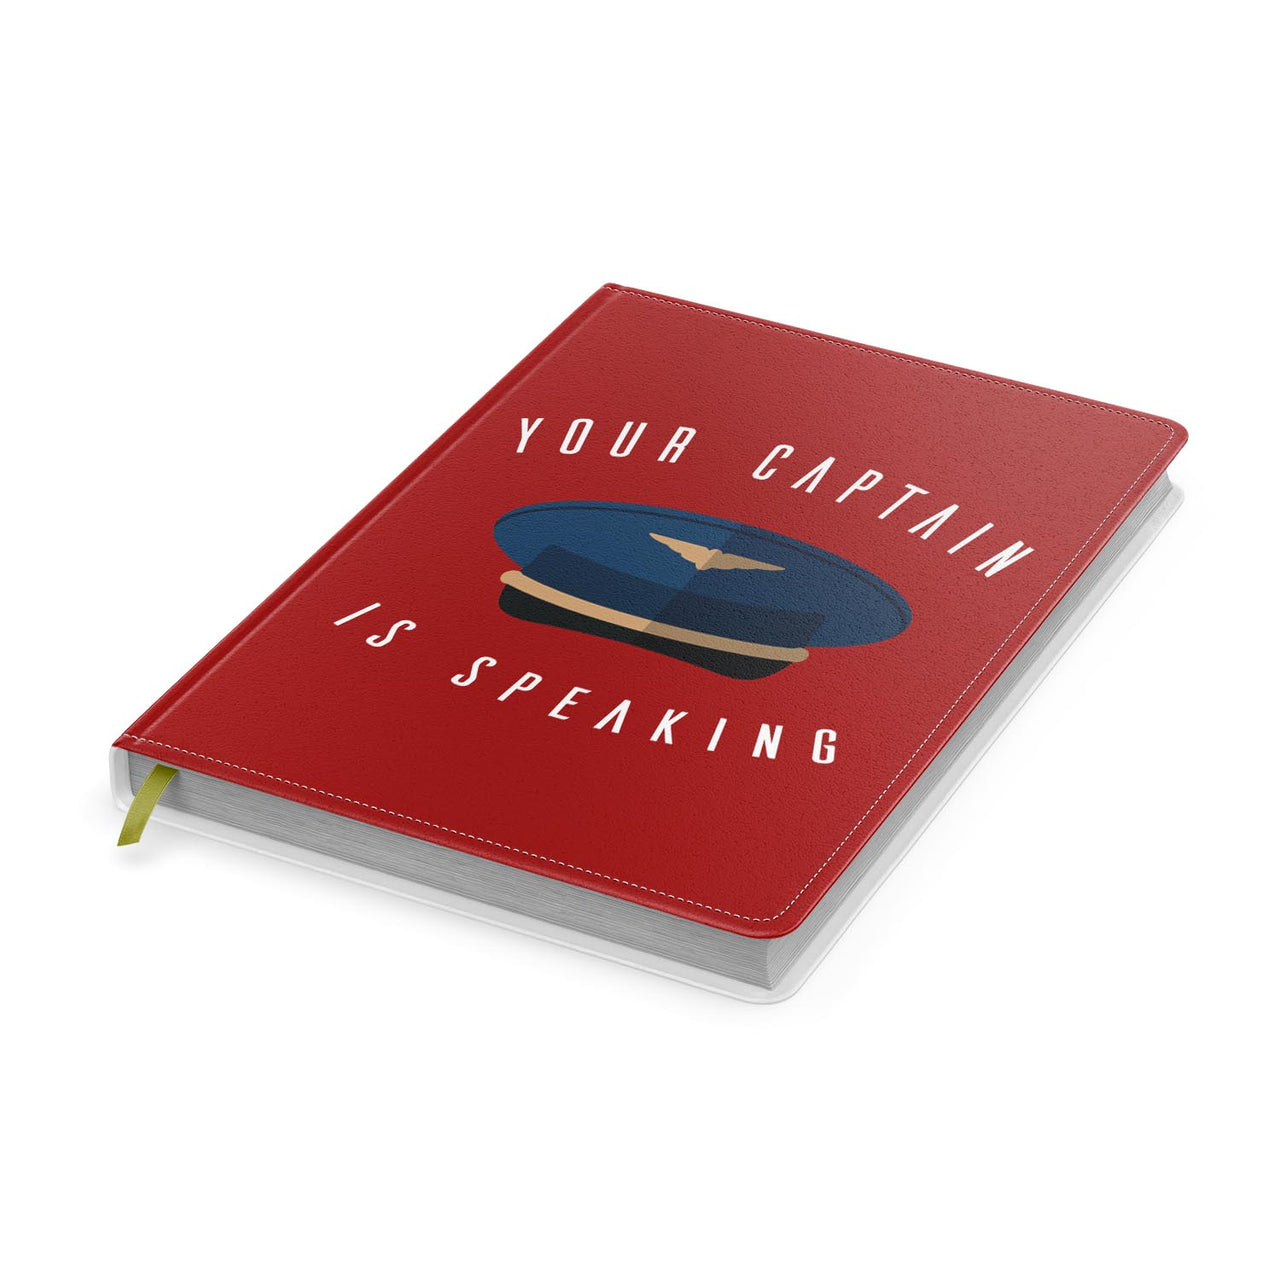 Your Captain Is Speaking Designed Notebooks